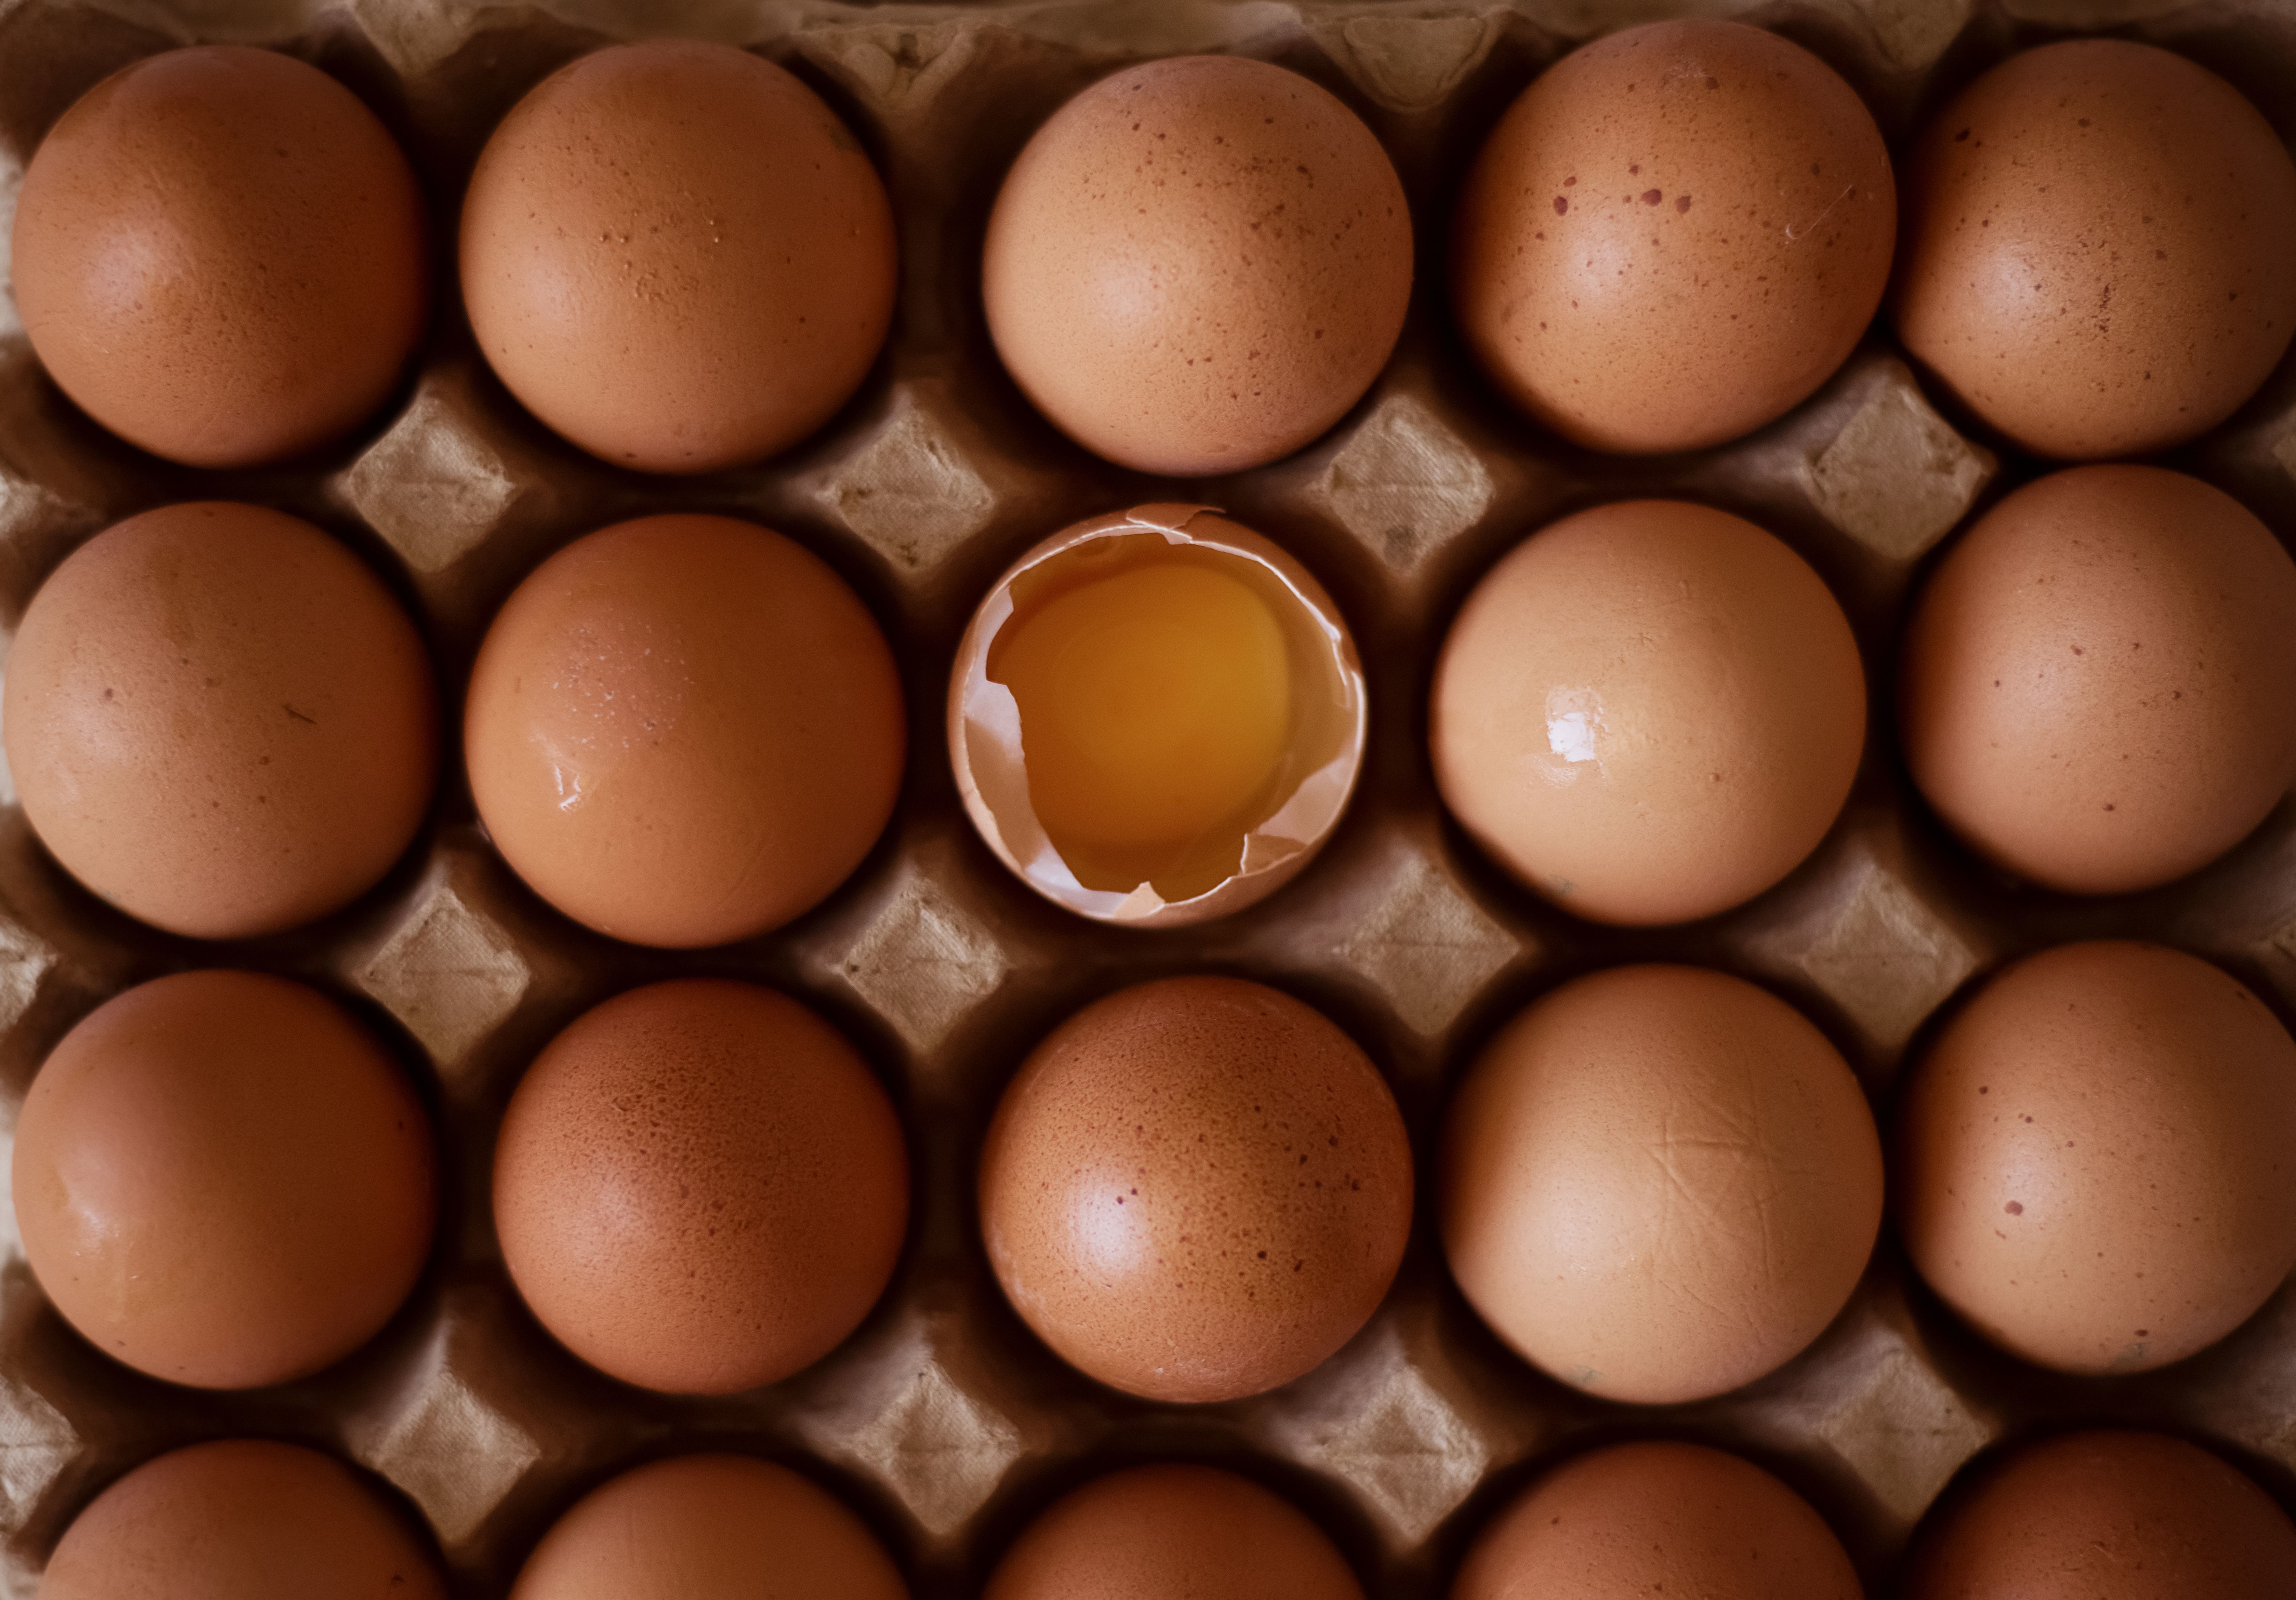 Background image of eggs in a carton, view from overhead